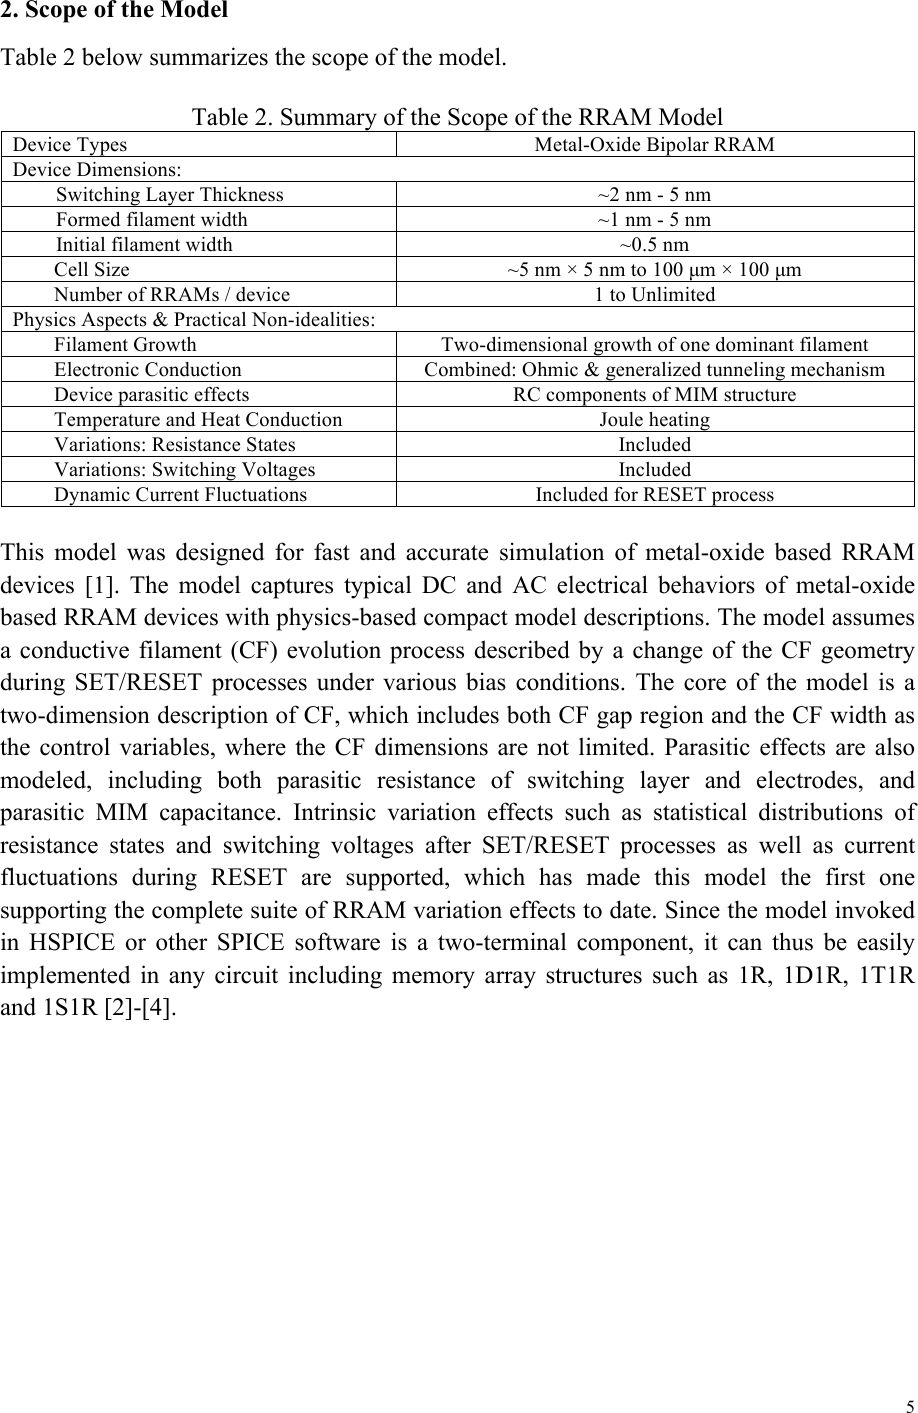 Page 5 of 12 - RRAM  V2.0Beta Quick User Guide Updated May